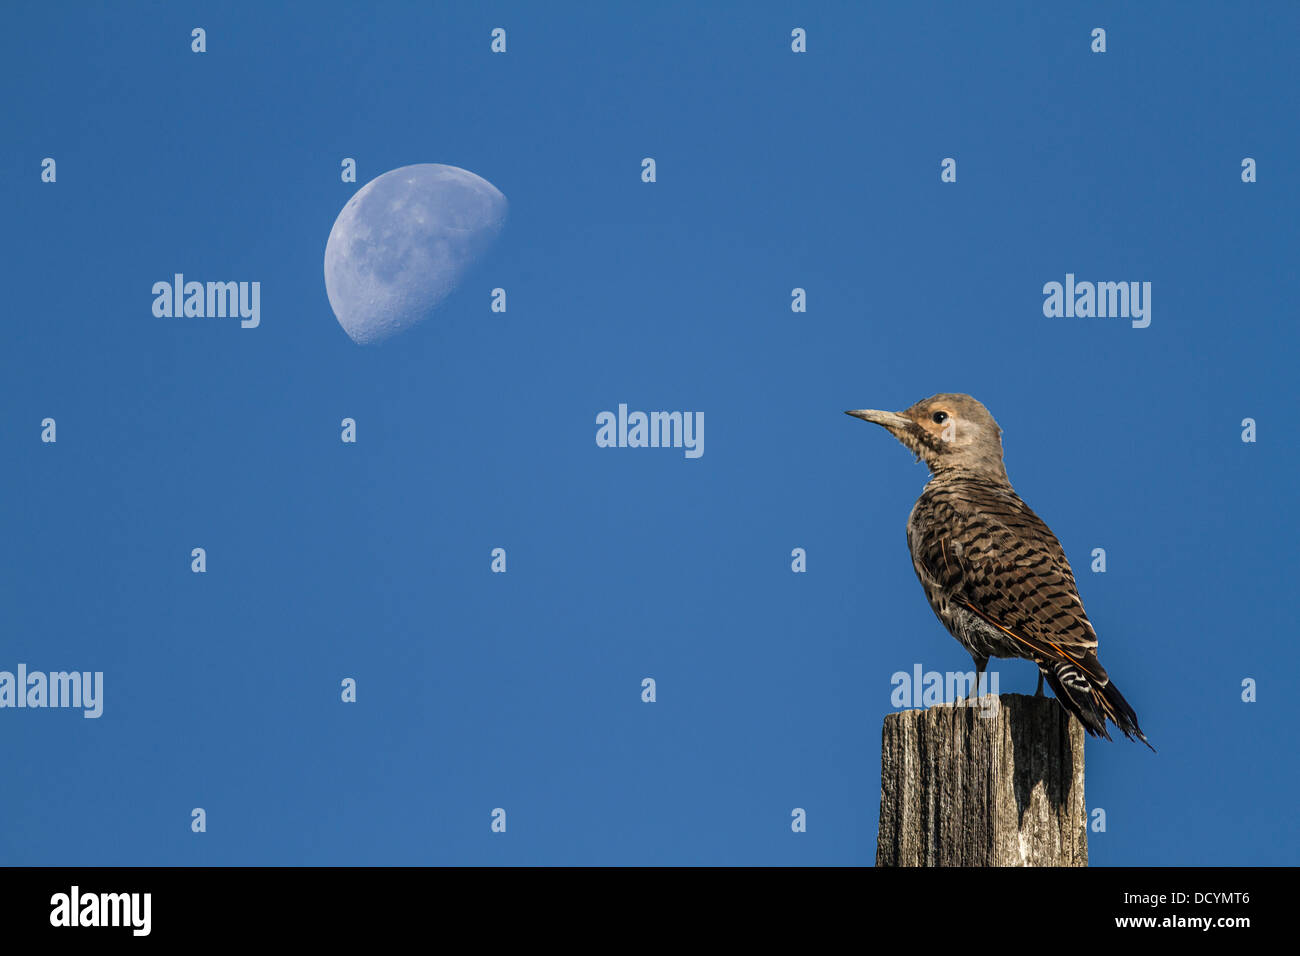 Northern Flicker (Colaptes auratus) Colorful bird, sitting on fence post with half moon, in blue sky, in background. Stock Photo